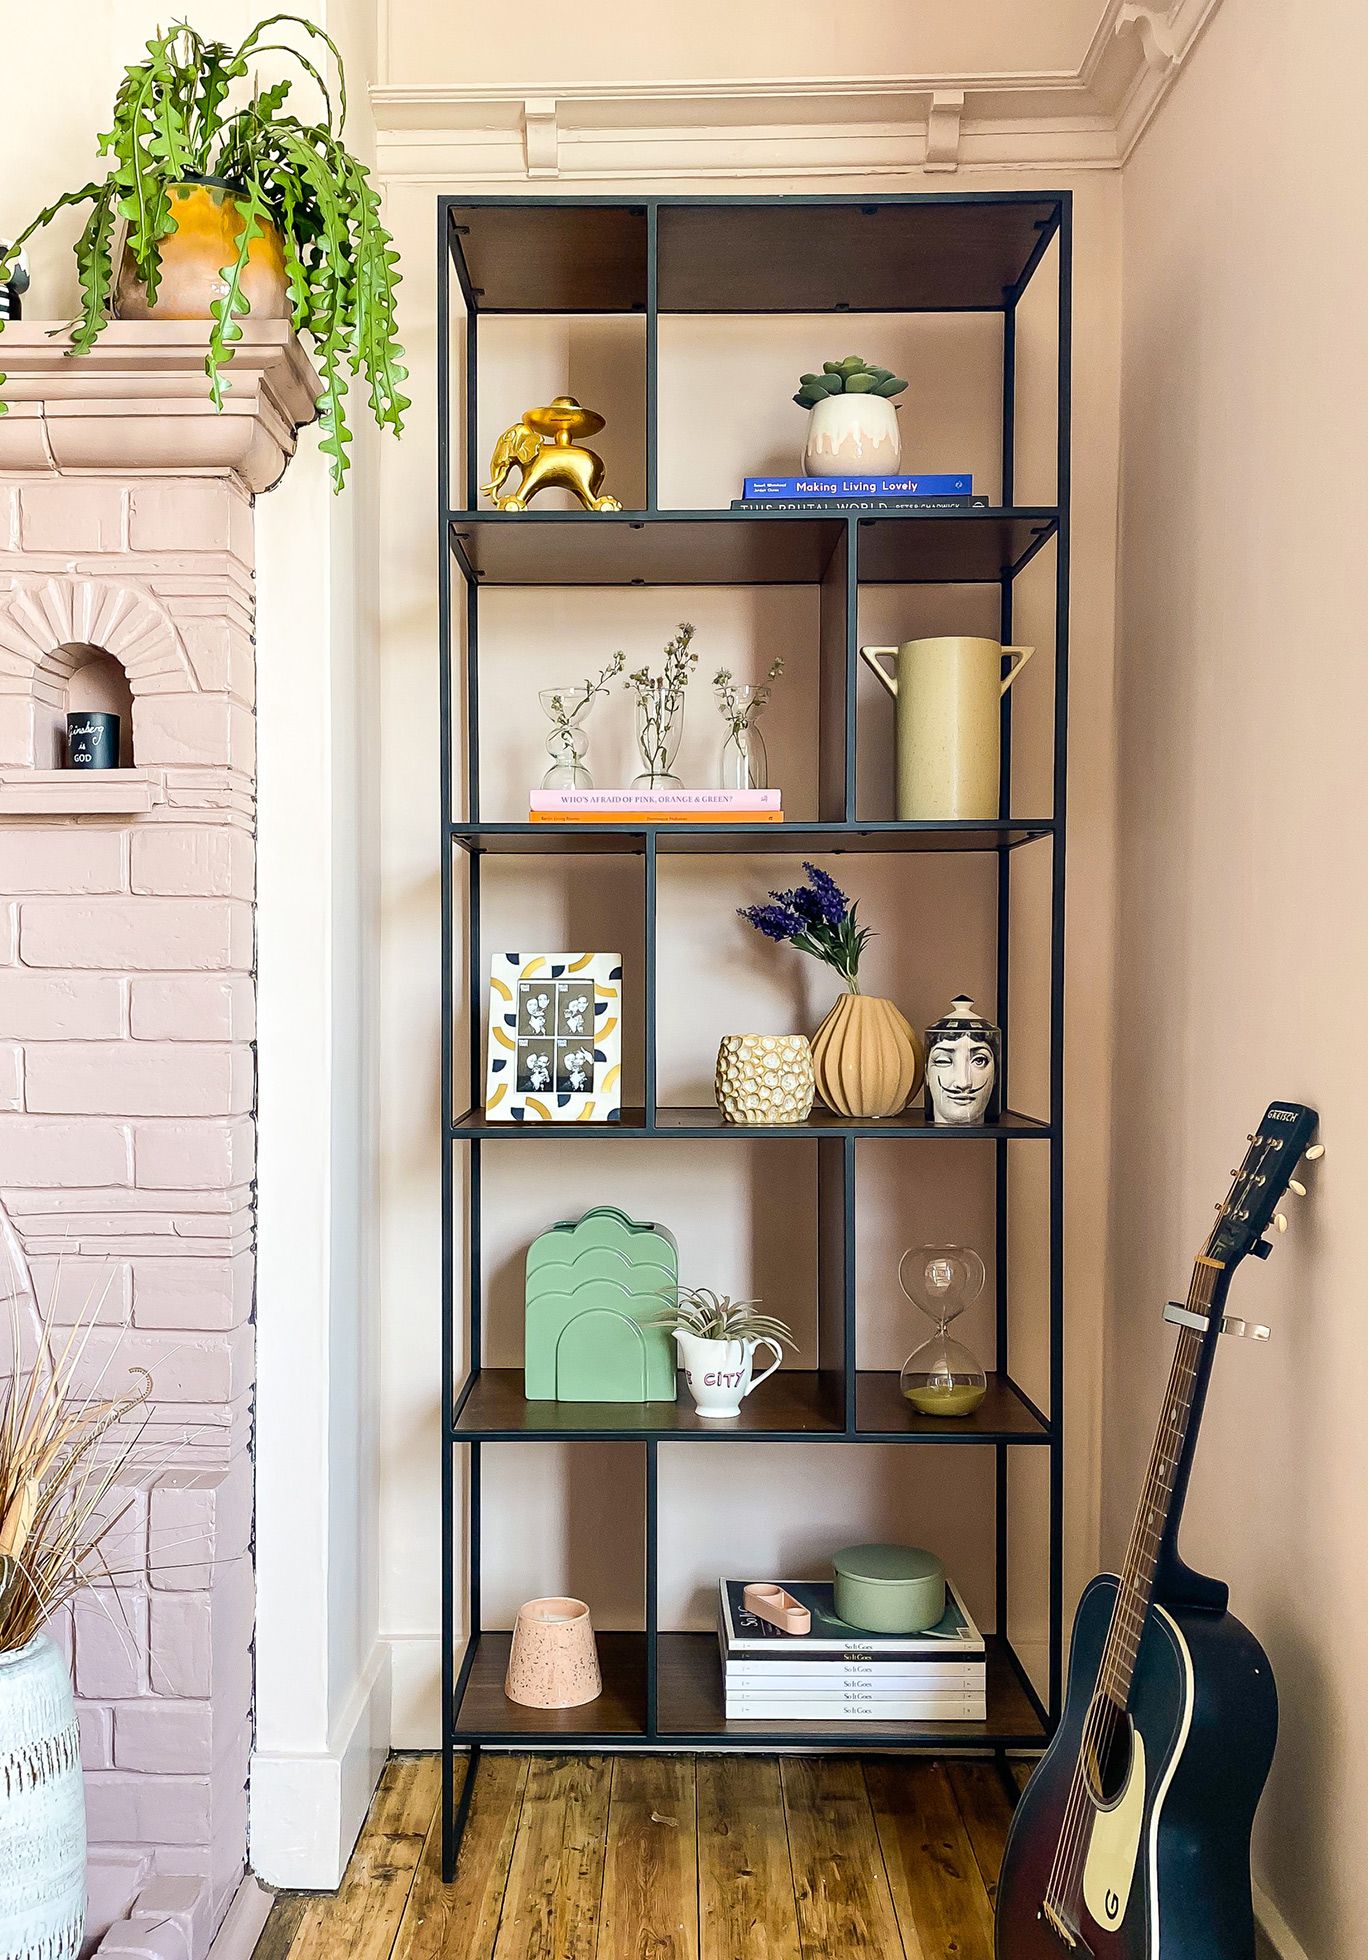 How to spruce up your shelving